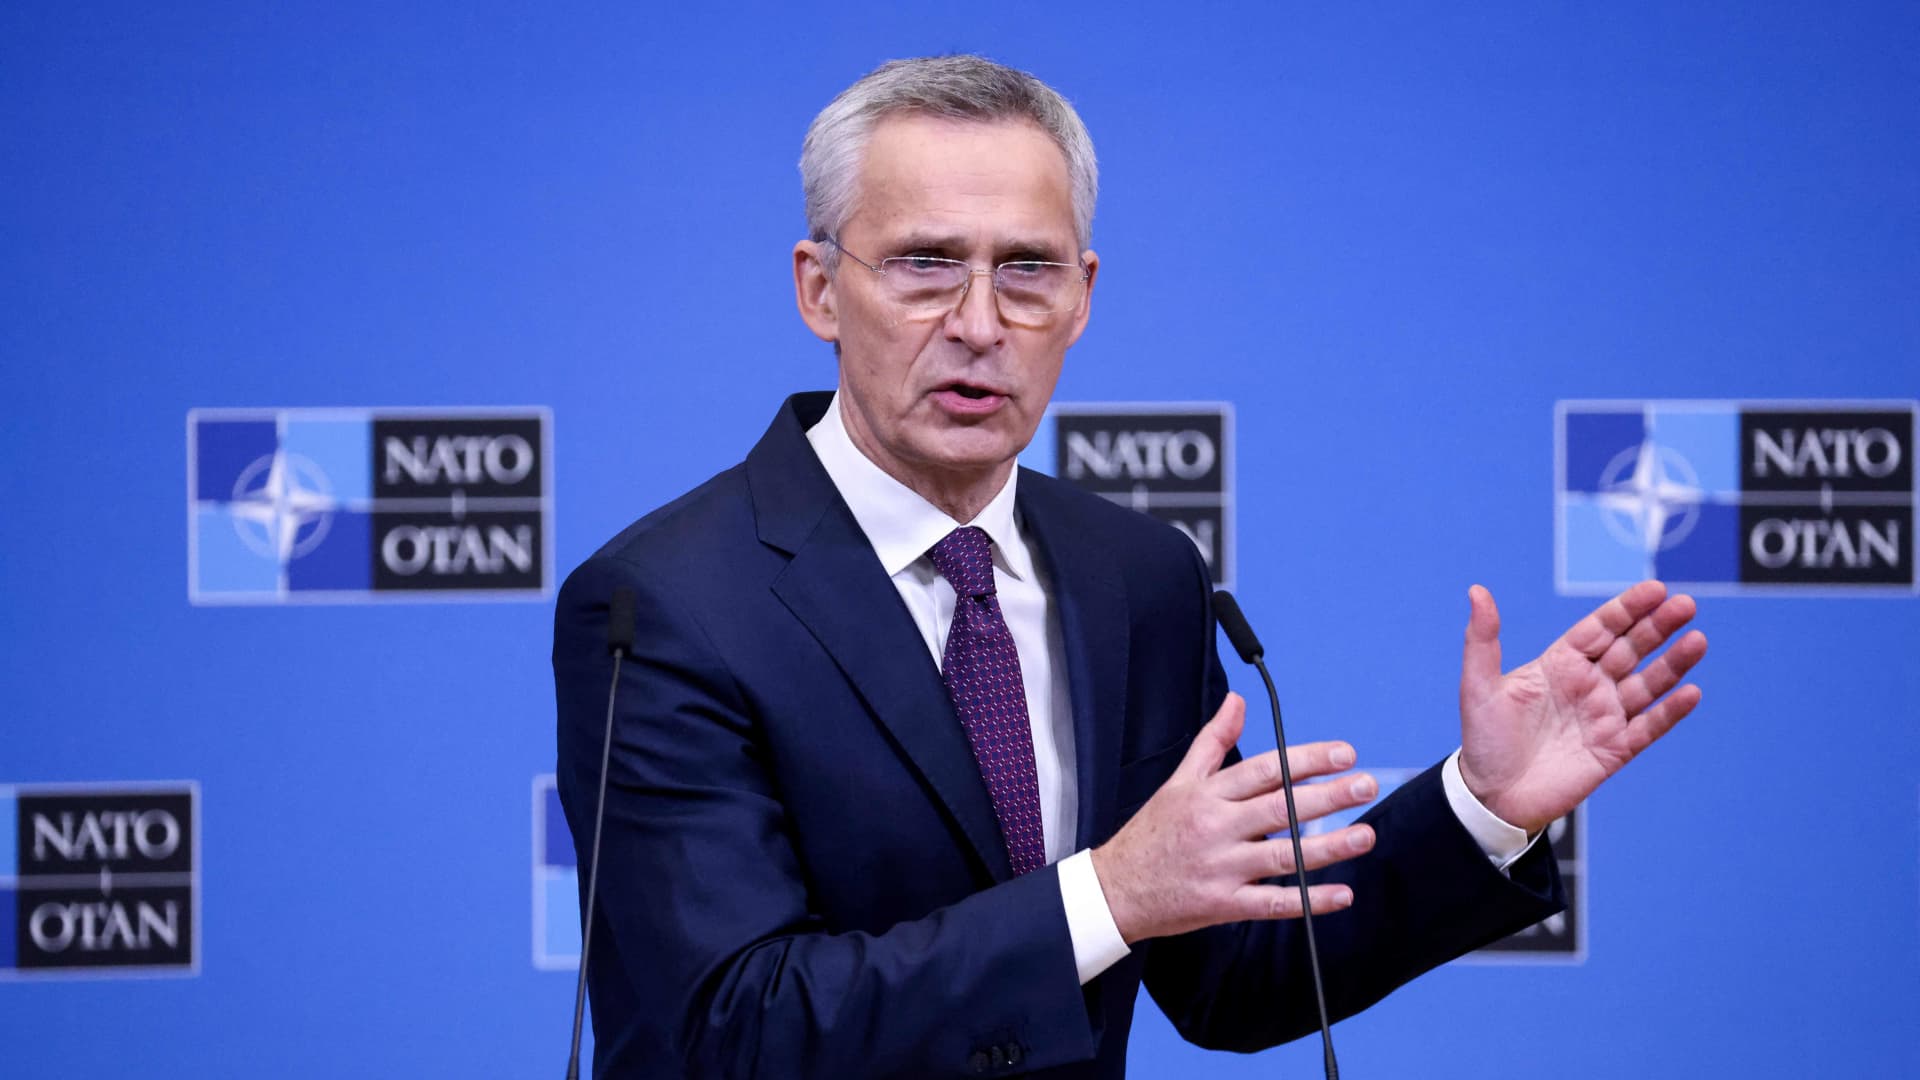 NATO Secretary General Jens Stoltenberg holds a press conference at the end of a two-day meeting of the alliance's defense ministers at the NATO headquarters in Brussels on Feb. 15, 2023.